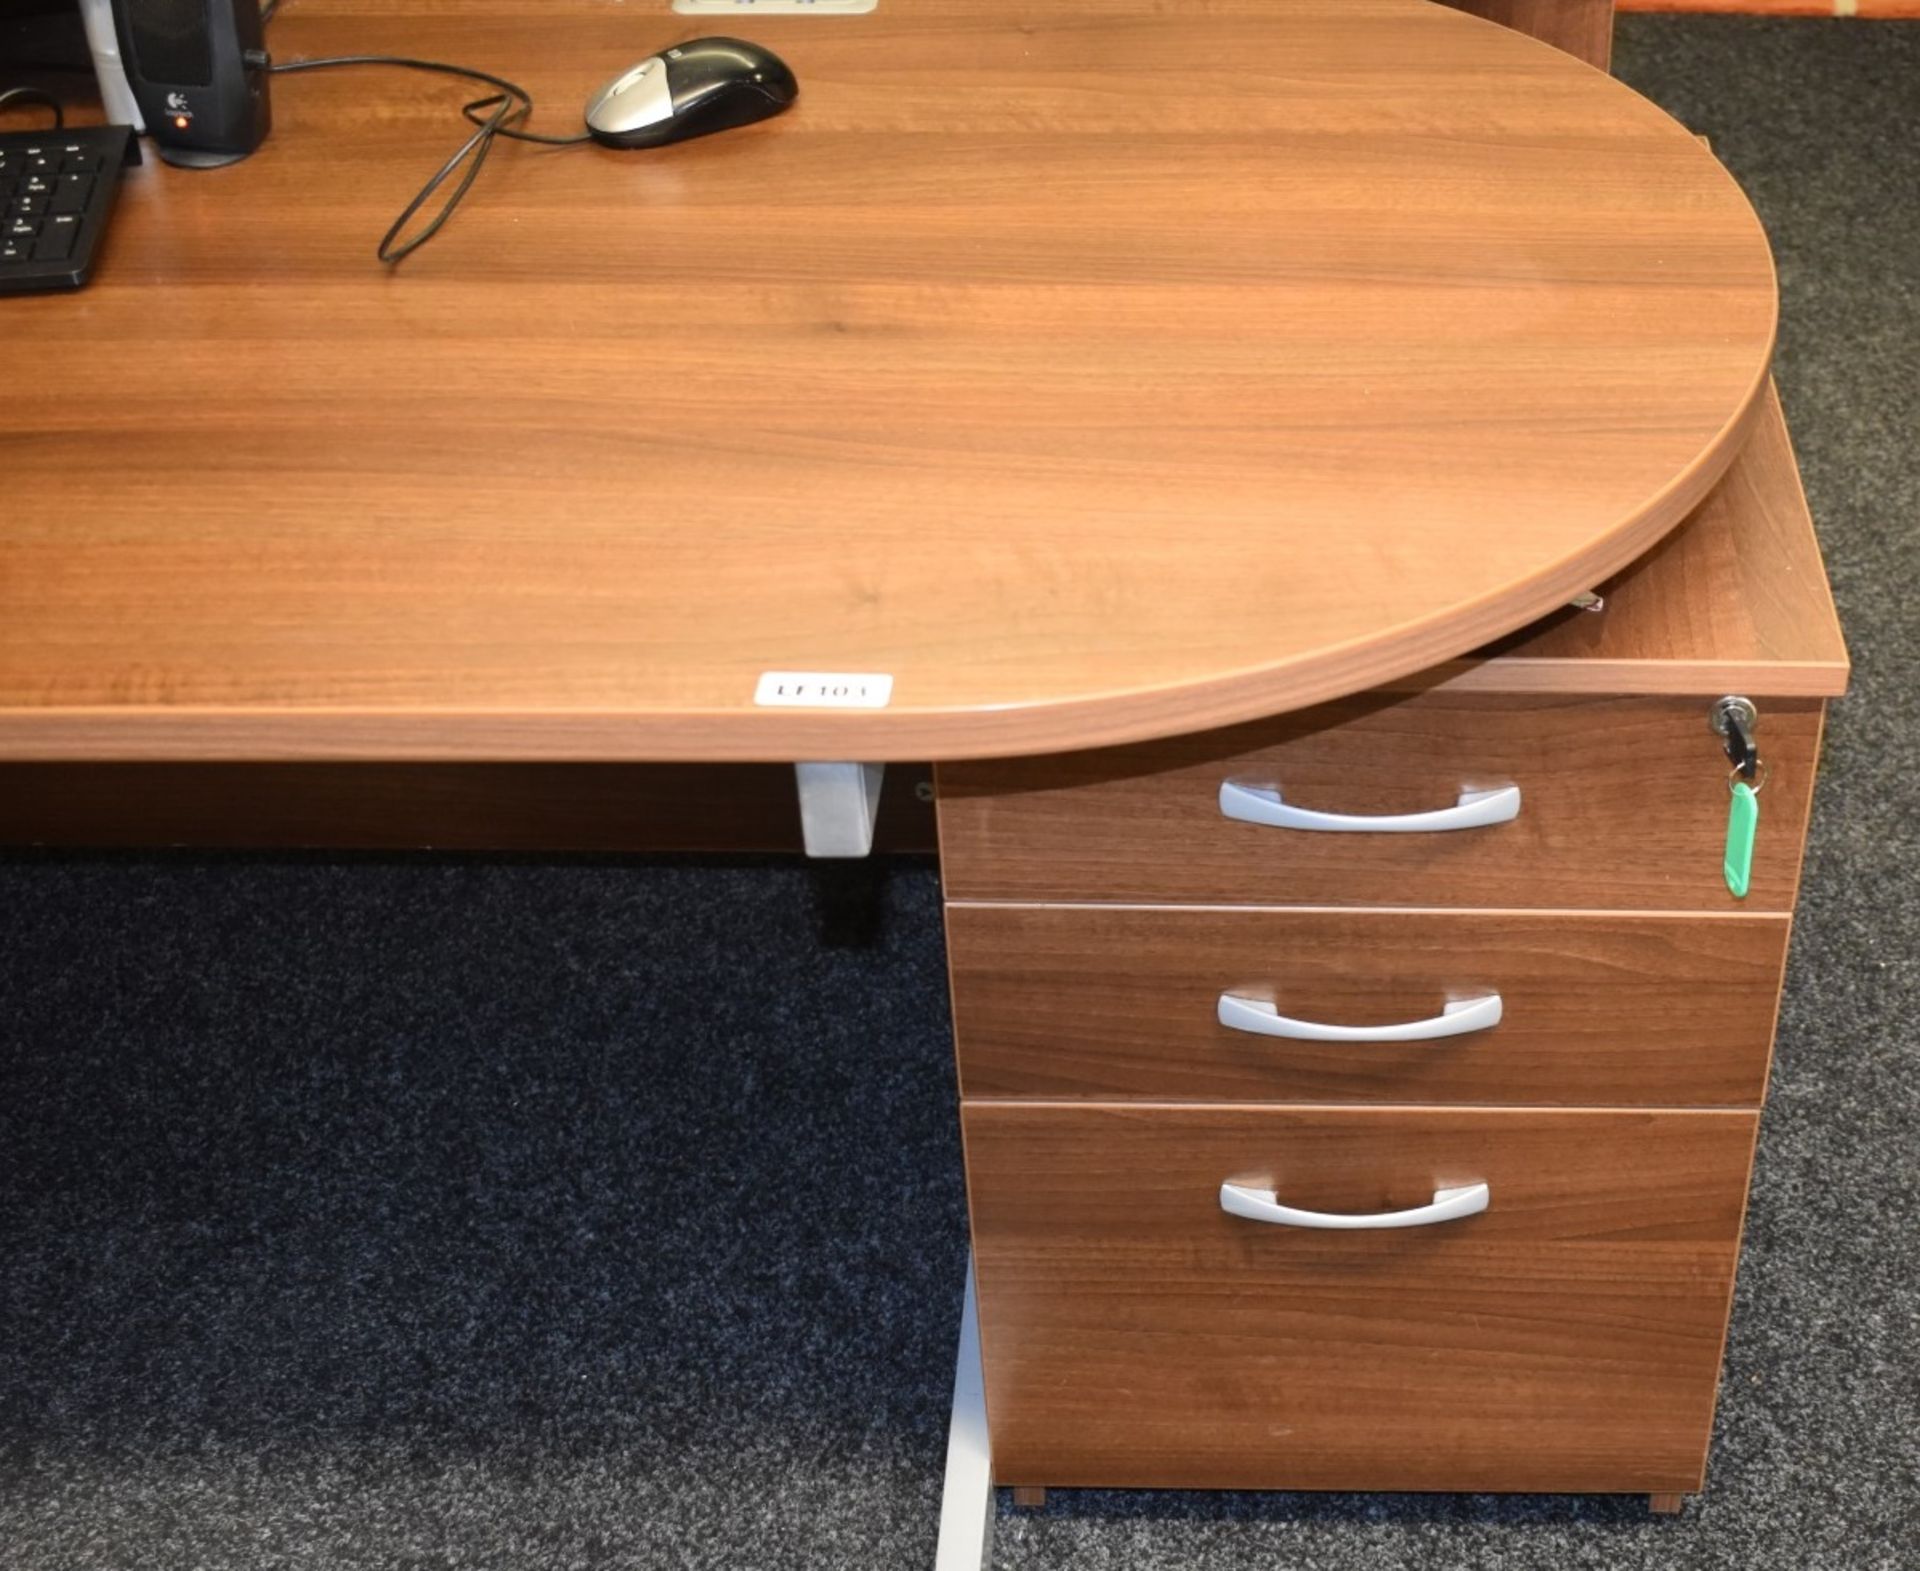 1 x Contemporary Office Desk - Features Semi Circle Meeting Point, Walnut Finish and Matching Drawer - Image 2 of 5